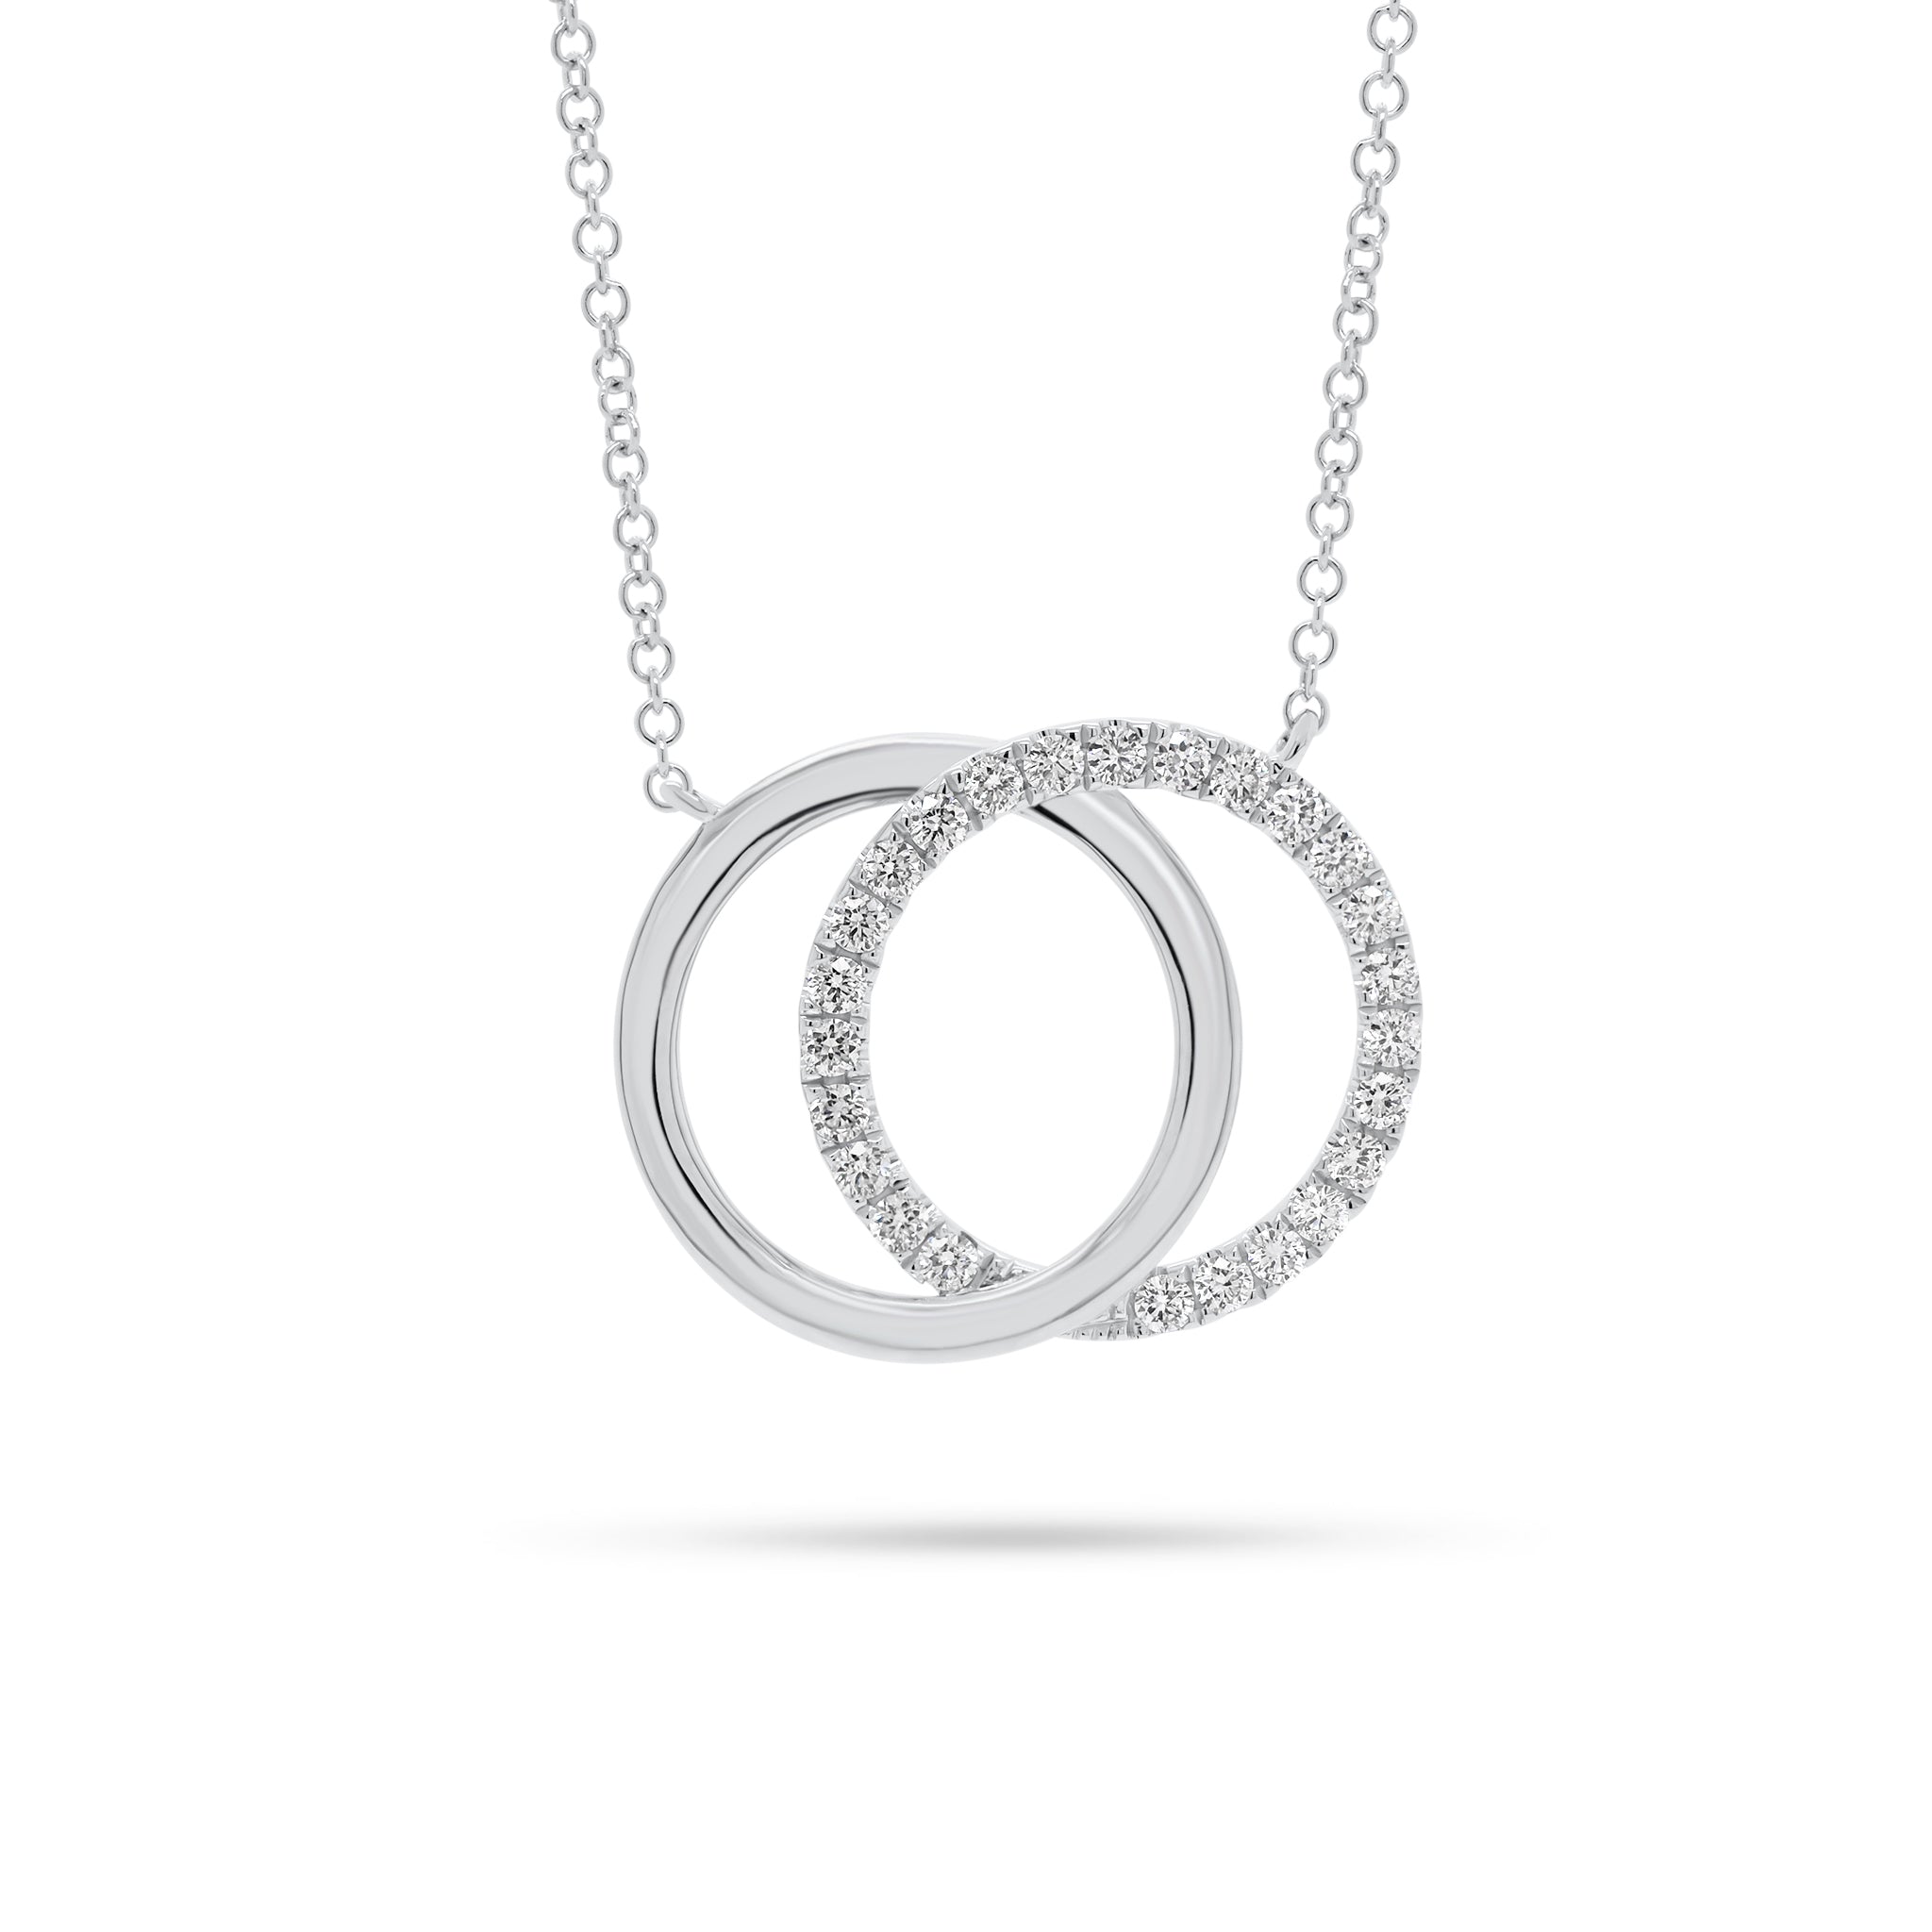 Ladies Double Interlocking Circle Sterling Silver Necklace